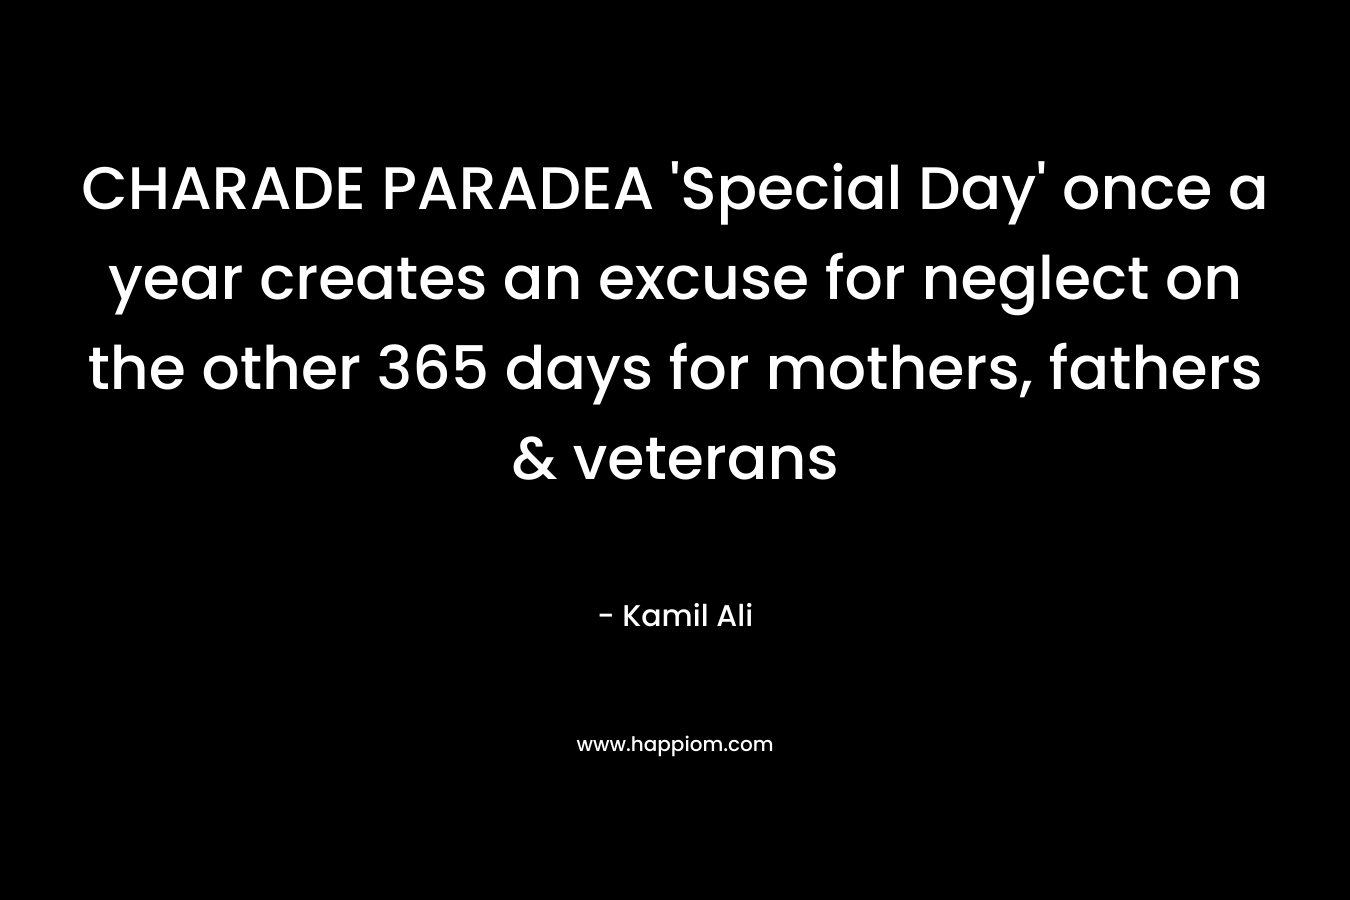 CHARADE PARADEA 'Special Day' once a year creates an excuse for neglect on the other 365 days for mothers, fathers & veterans